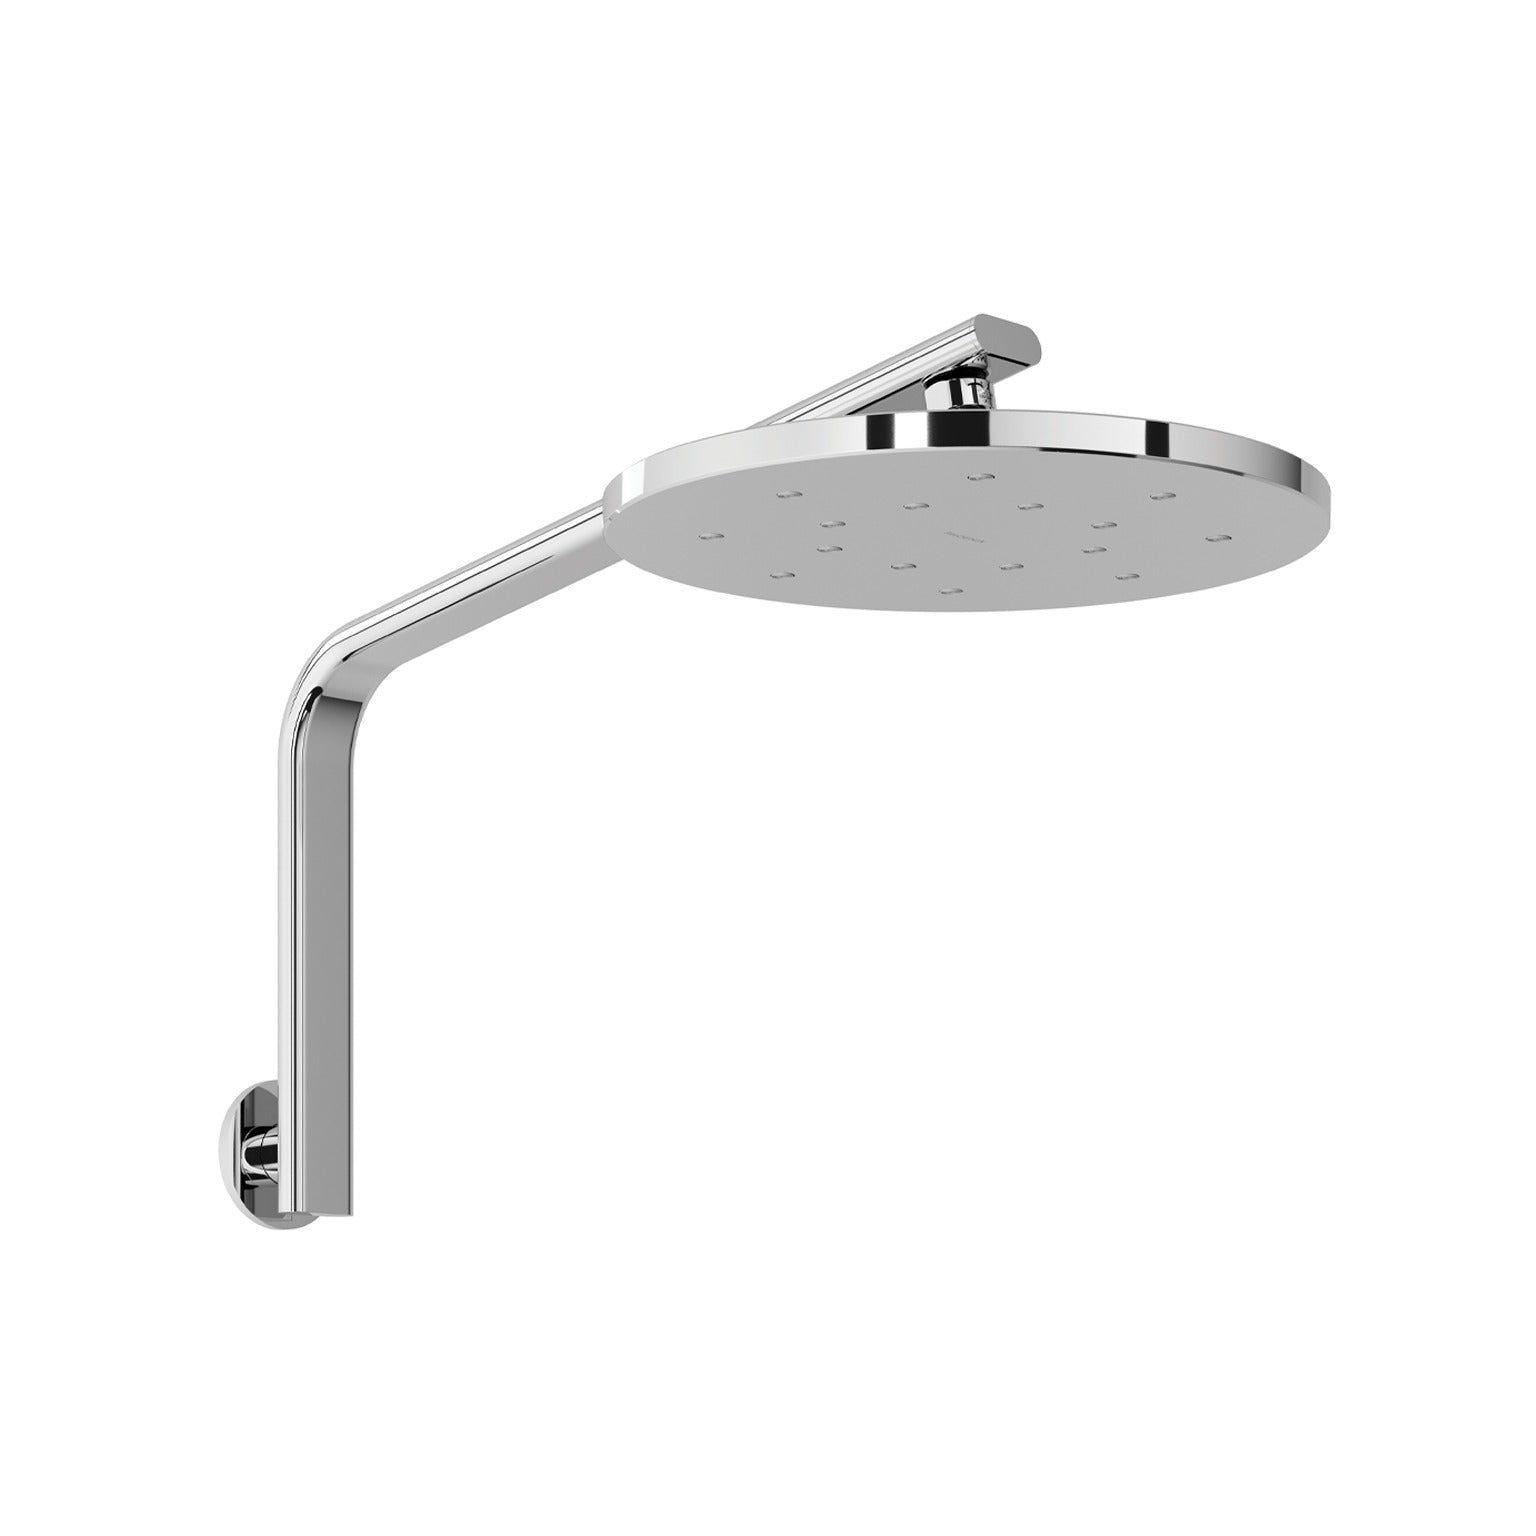 PHOENIX OXLEY HIGH-RISE SHOWER ARM AND ROSE CHROME